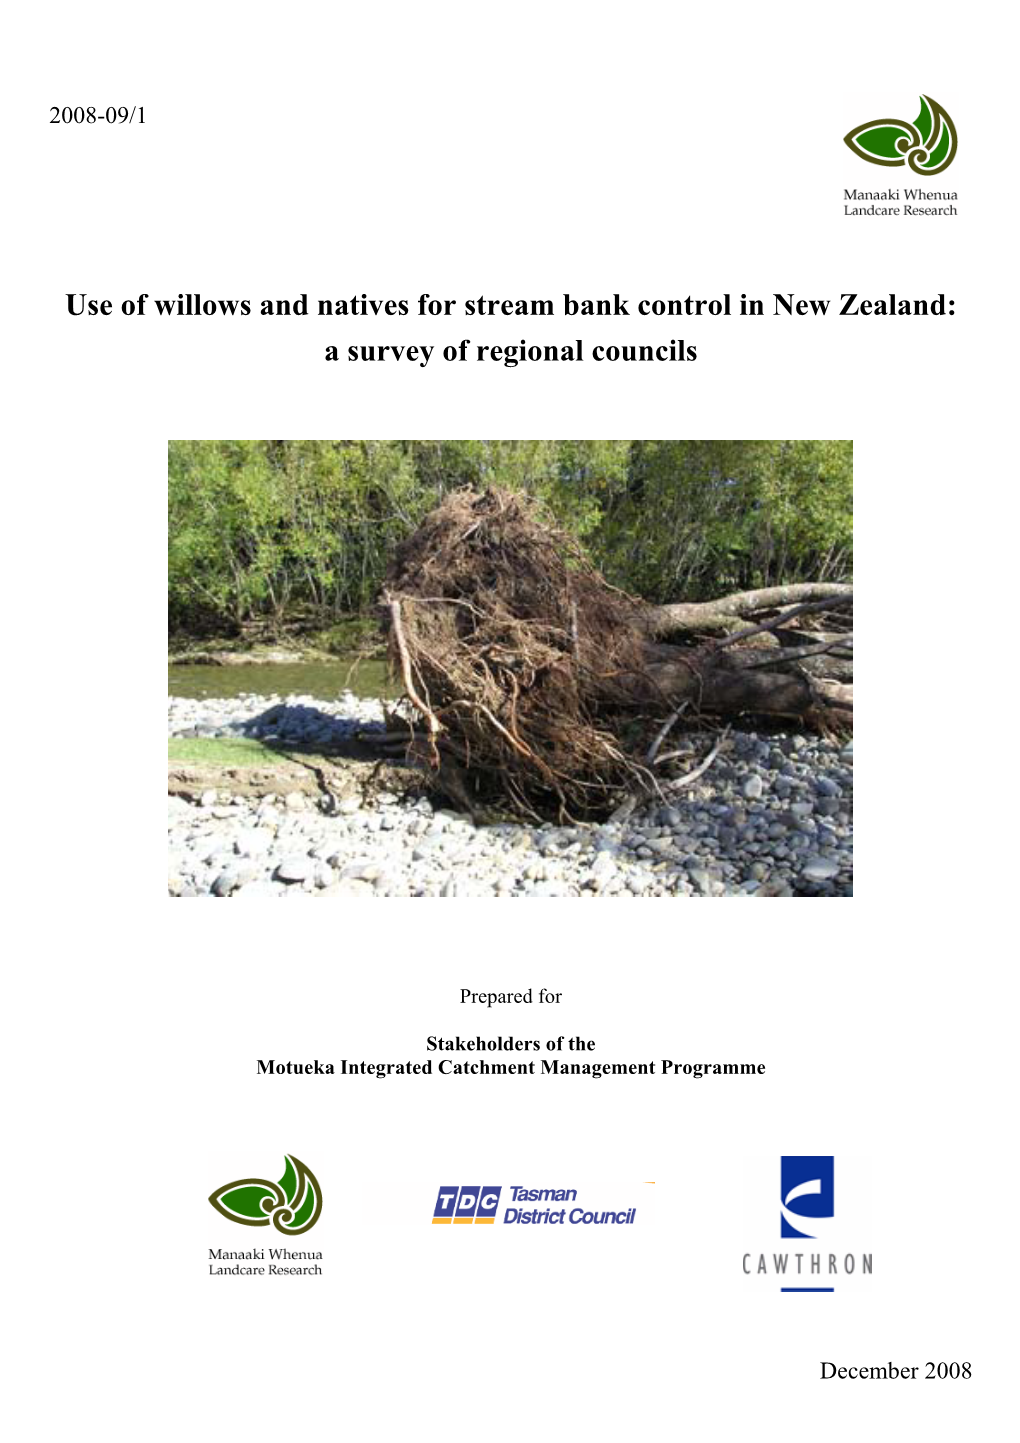 Willows Or Natives for Stream Bank Control: a Survey of Usage in New Zealand Regional Councils